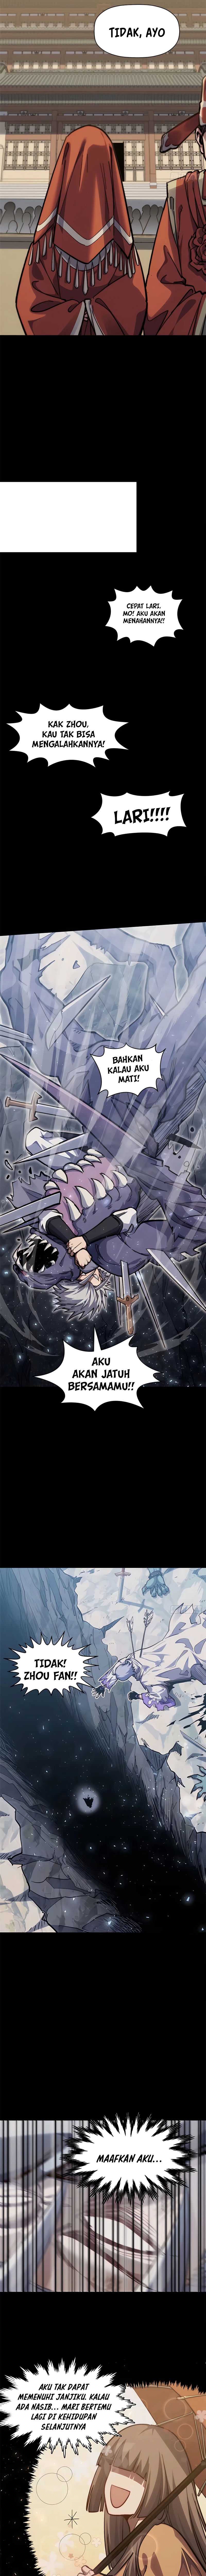 Dilarang COPAS - situs resmi www.mangacanblog.com - Komik top tier providence secretly cultivate for a thousand years 100 - chapter 100 101 Indonesia top tier providence secretly cultivate for a thousand years 100 - chapter 100 Terbaru 8|Baca Manga Komik Indonesia|Mangacan